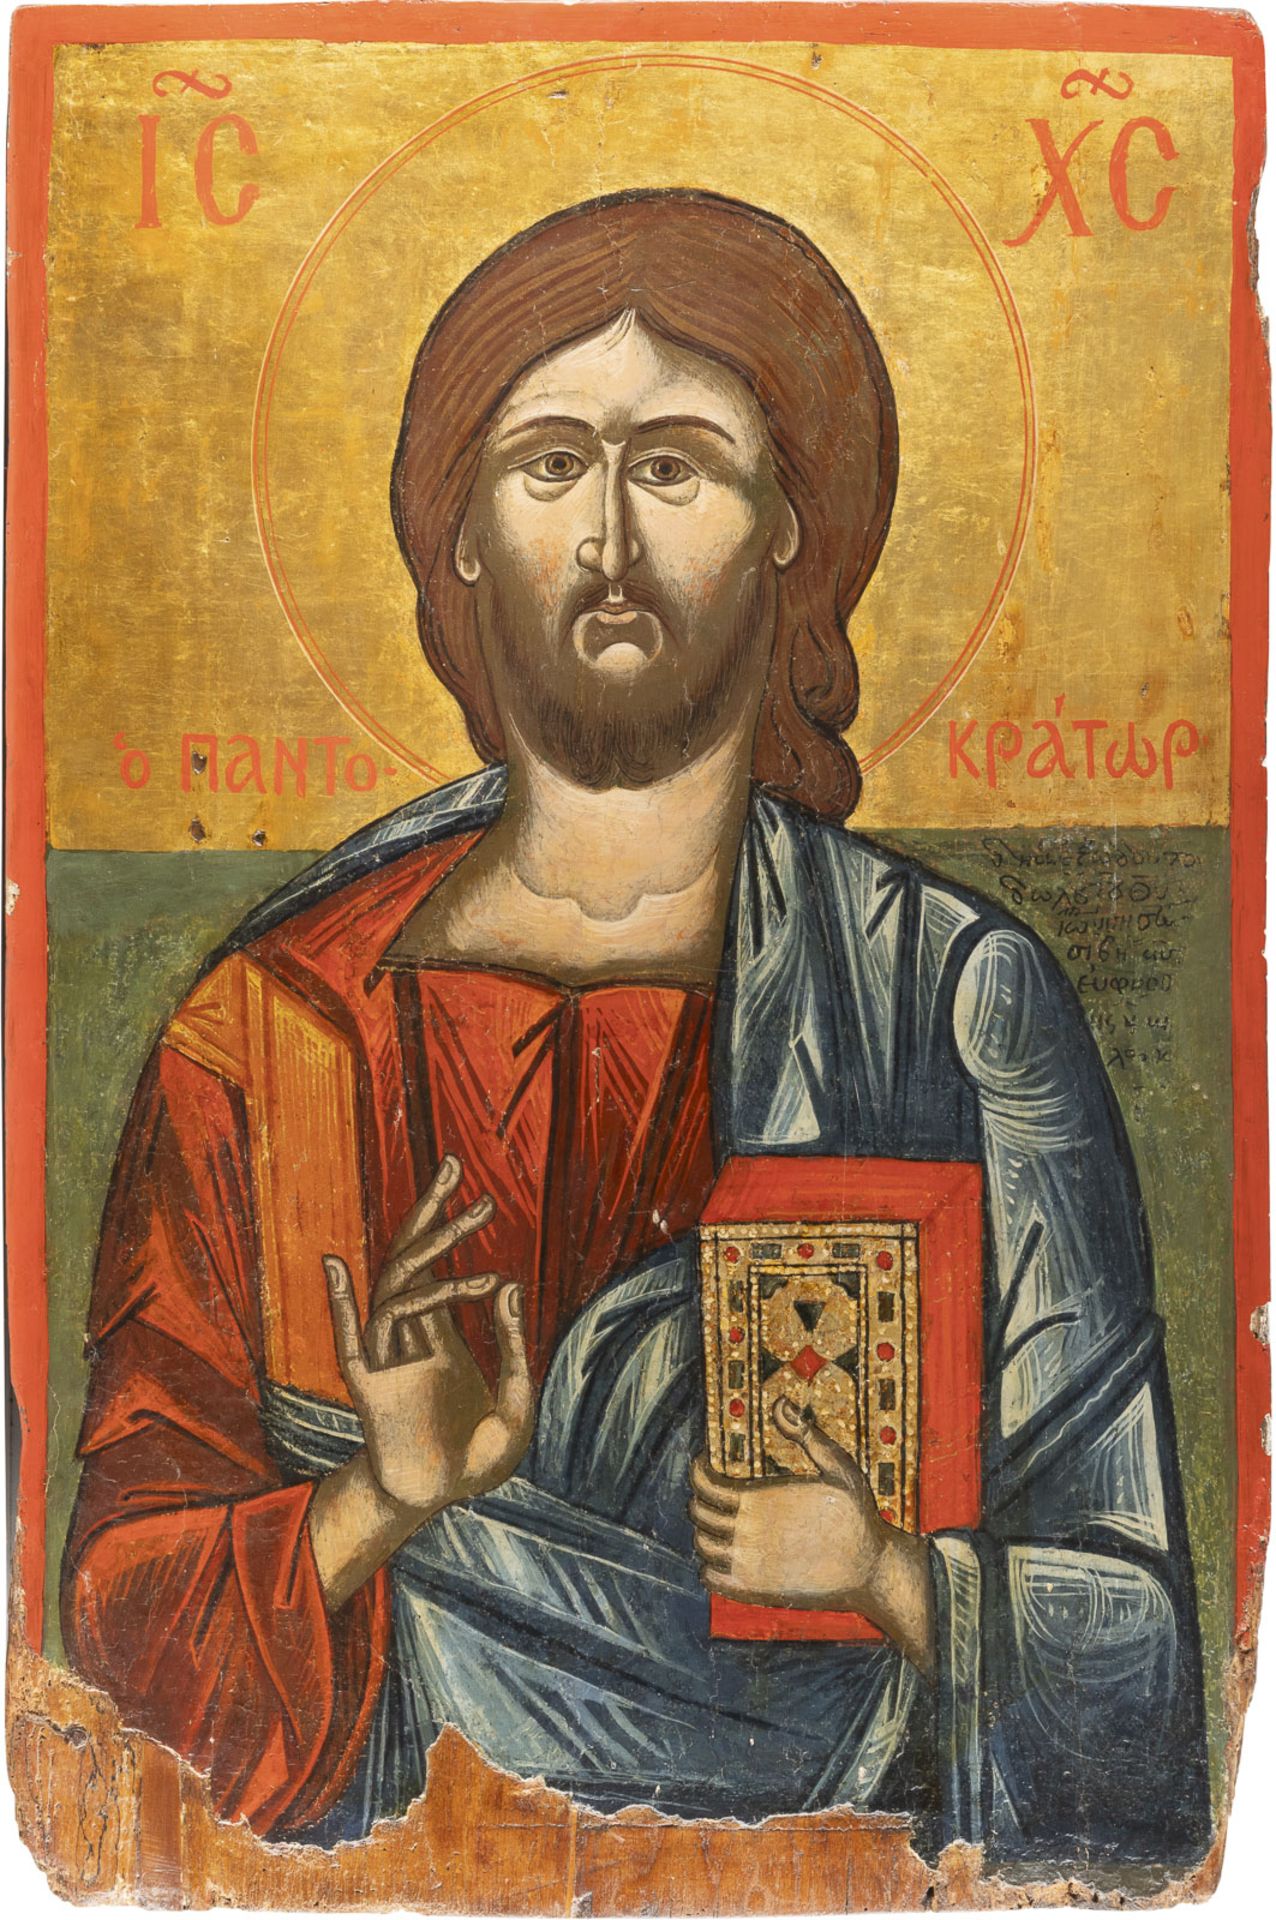 A MONUMENTAL ICON SHOWING CHRIST PANTOKRATOR FROM A CHURCH ICONOSTASIS